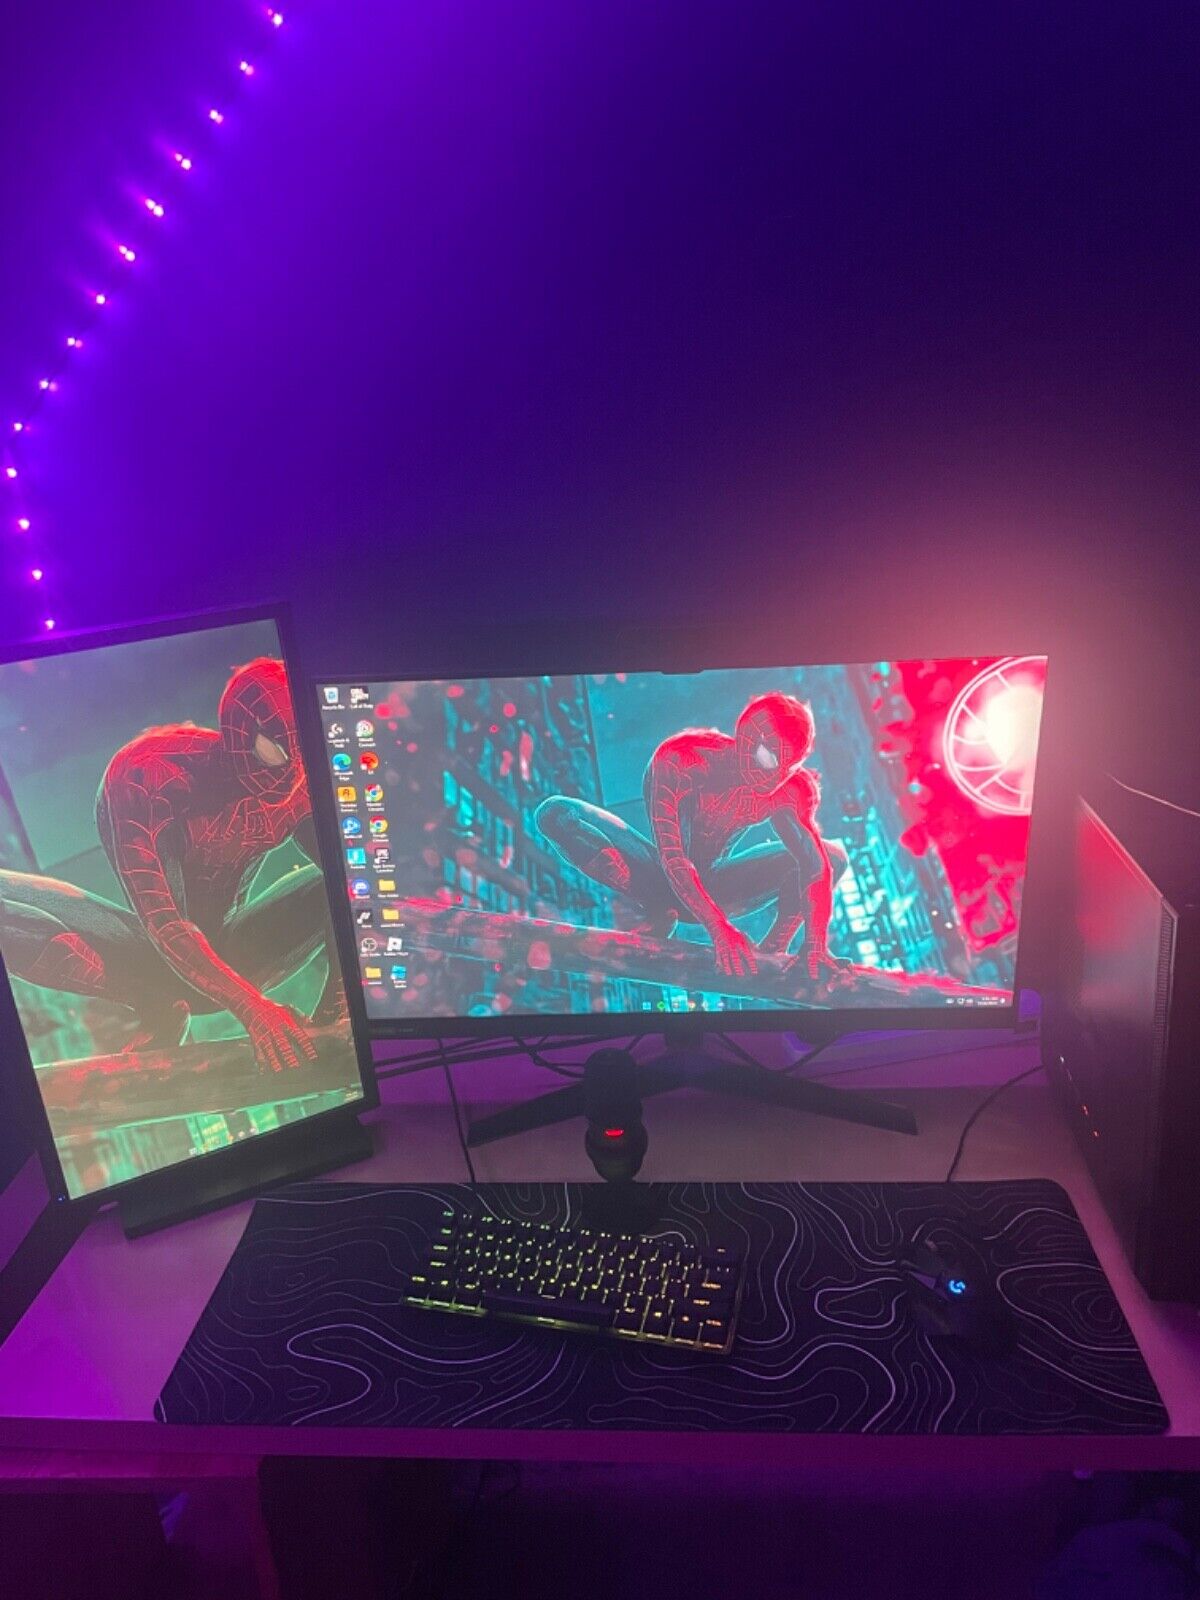 Selling COMPLETE Gaming Setup PC/TWO MONITORS/KEYBOARD/MOUSE/MIC AND MOUSEPAD